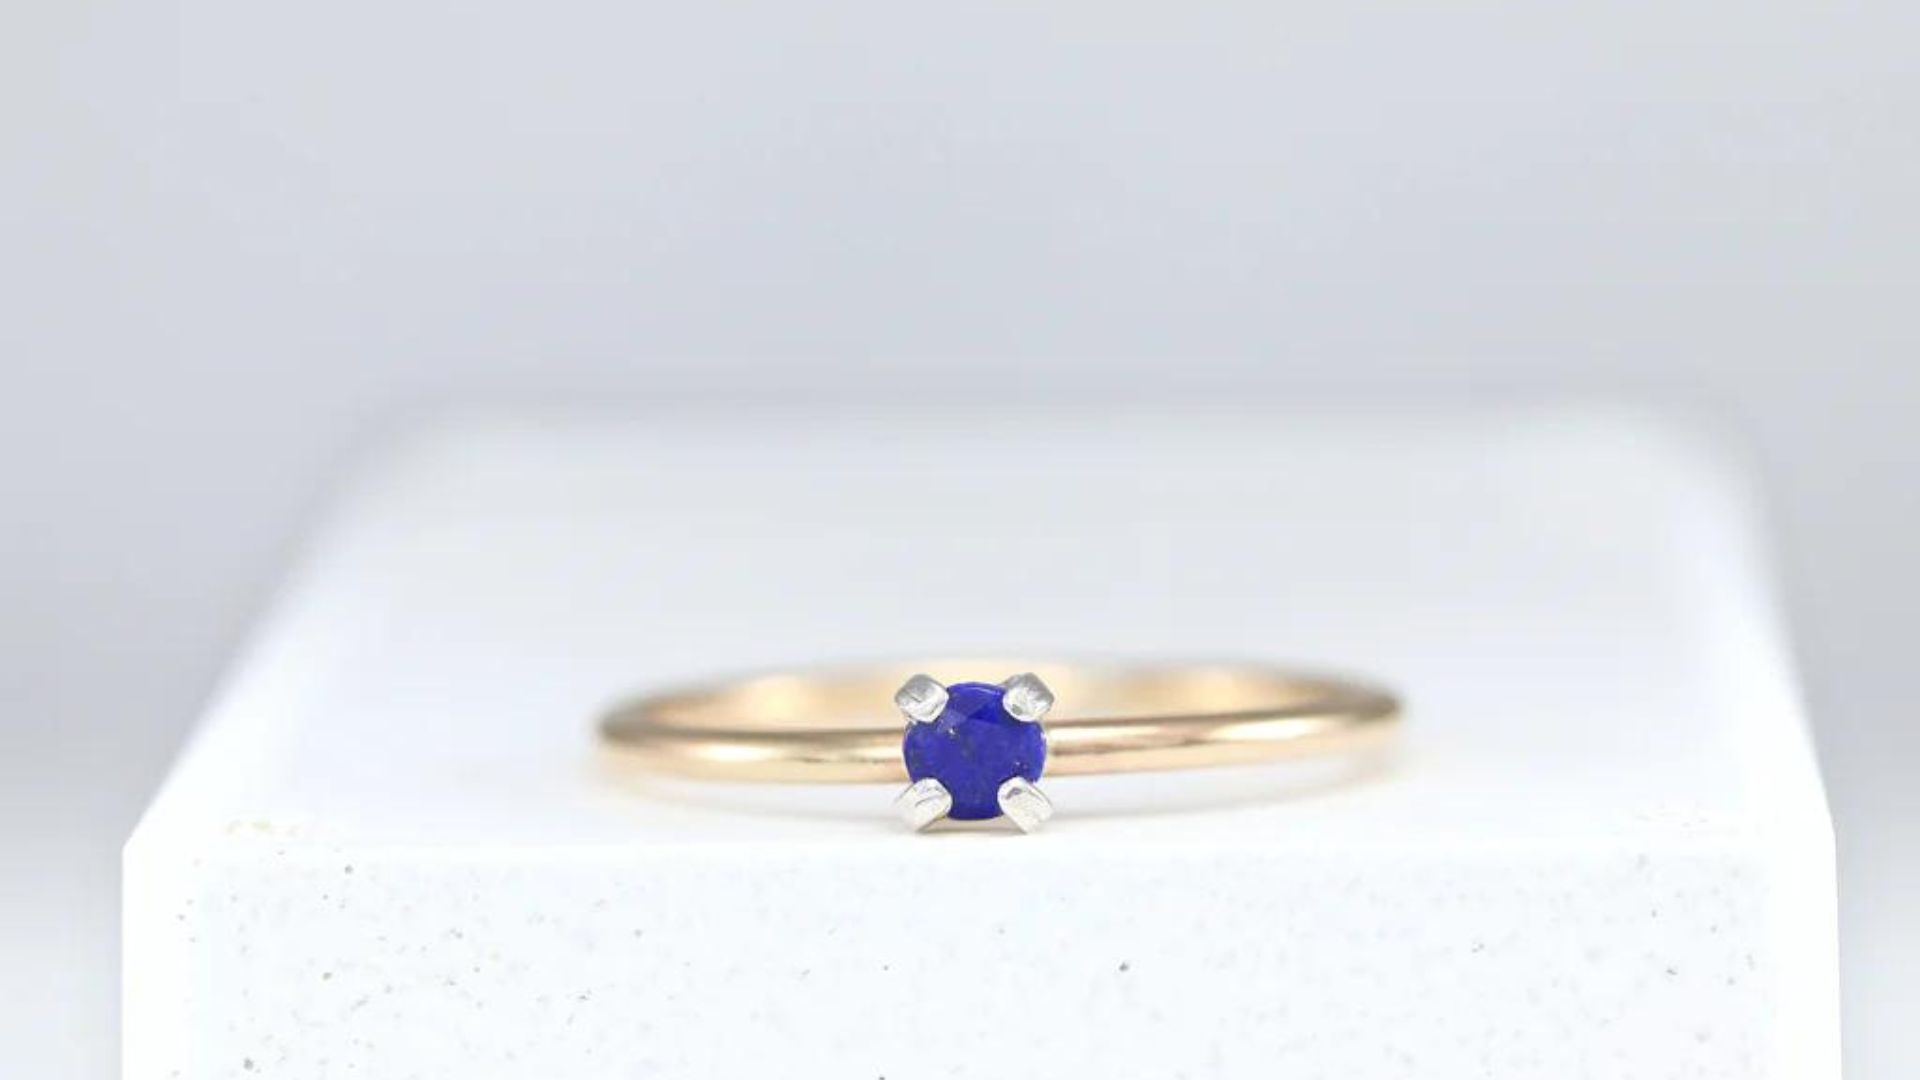 A Silver Ring With Small Blue Stone